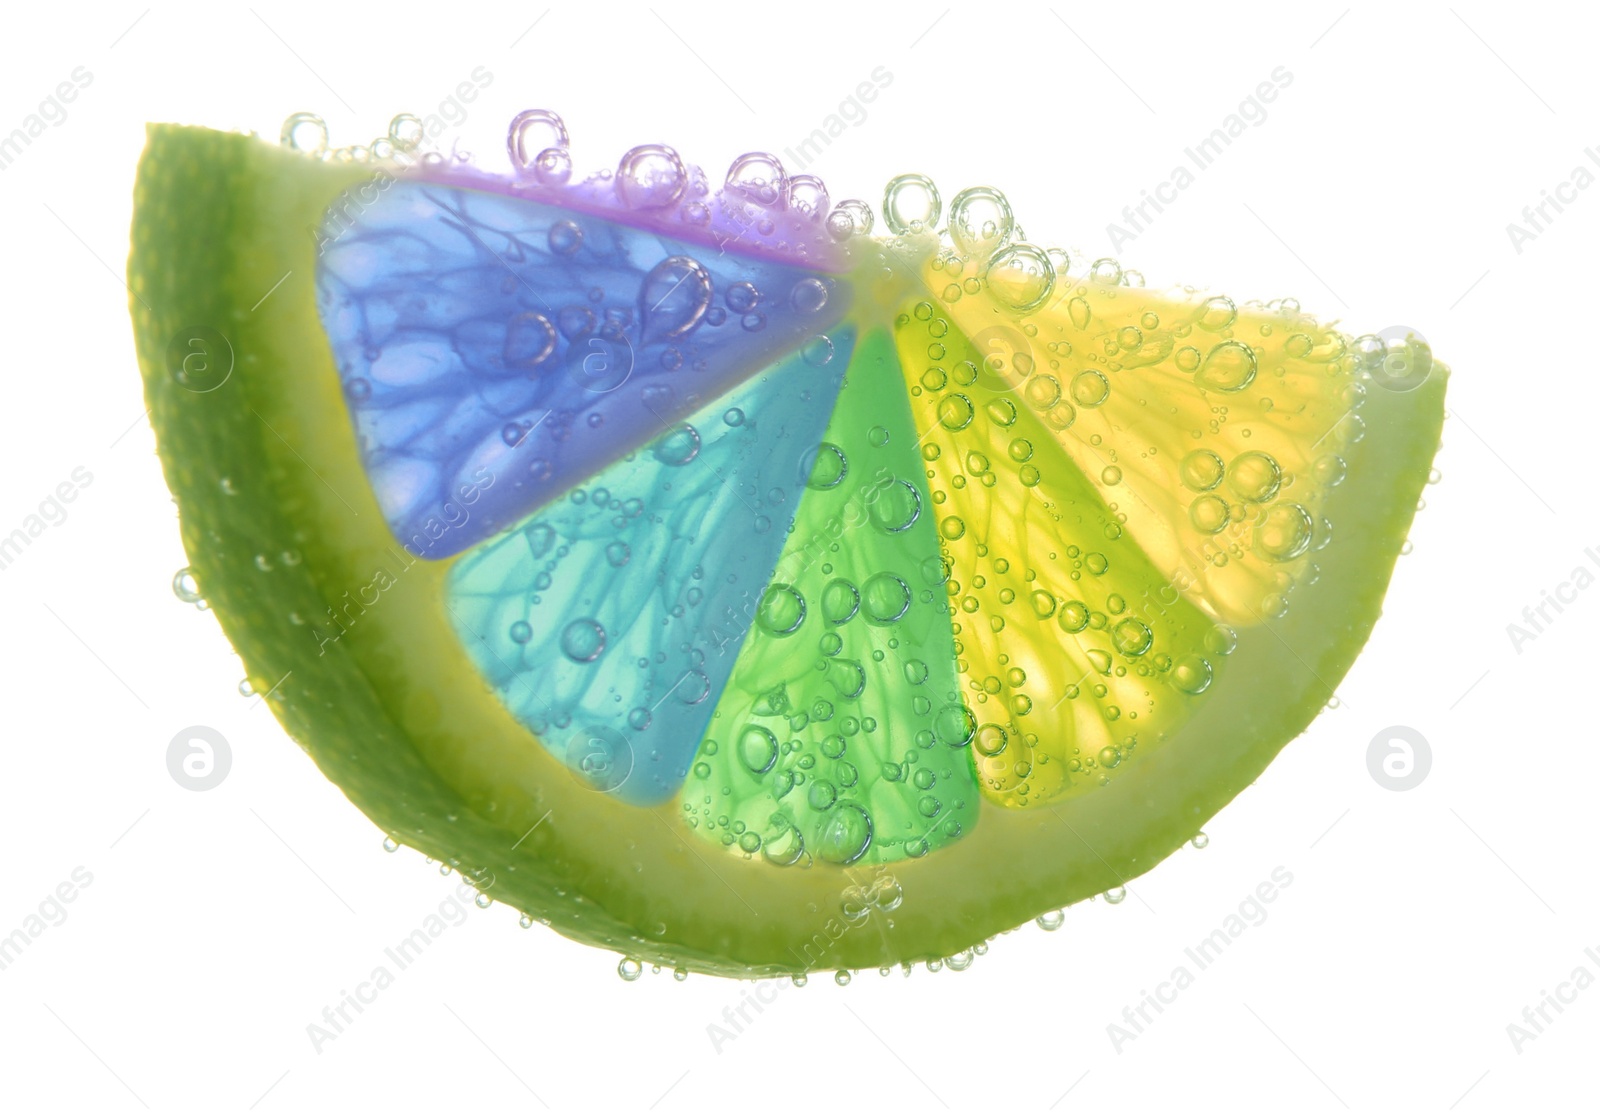 Image of Fresh lime slice with rainbow segments and water bubbles on white background. Brighten your life